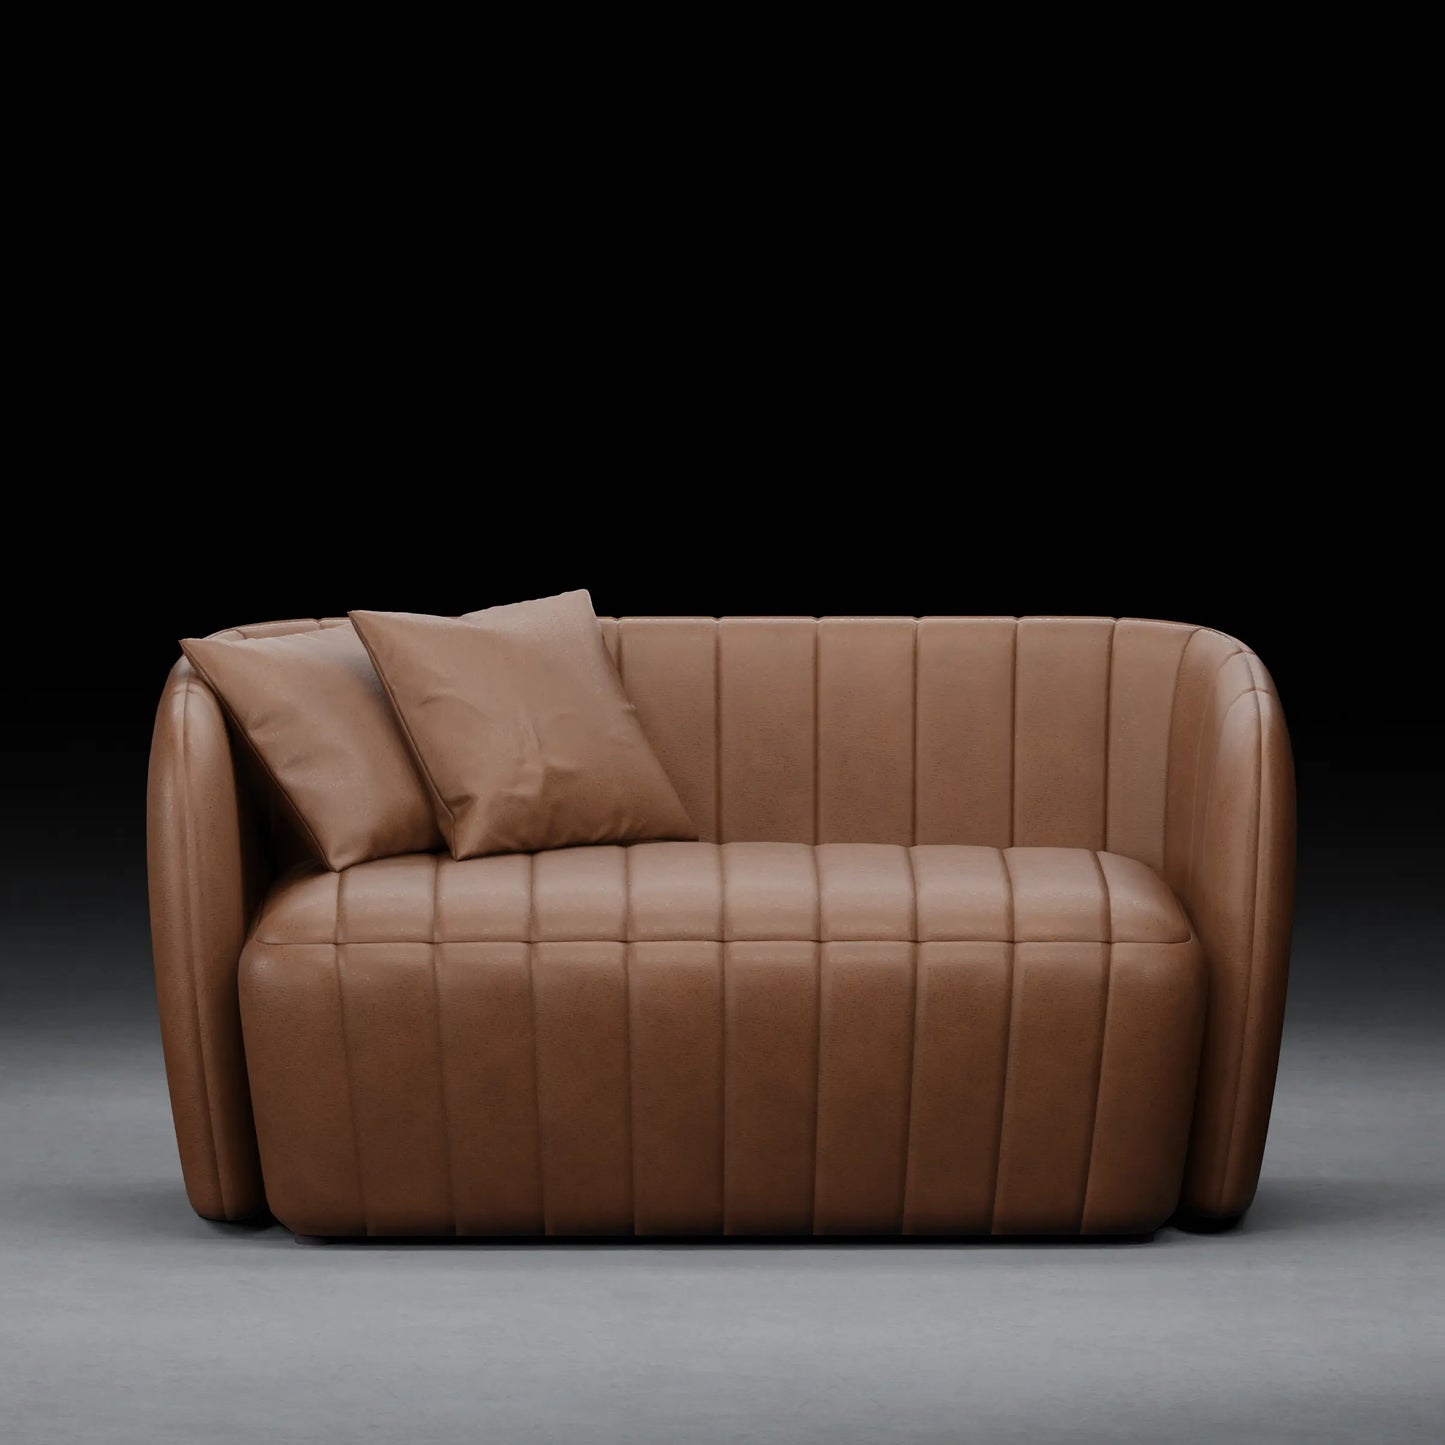 DAFFODIL - 2 Seater Tuxedo Couch In Leather Finish | Brown Color